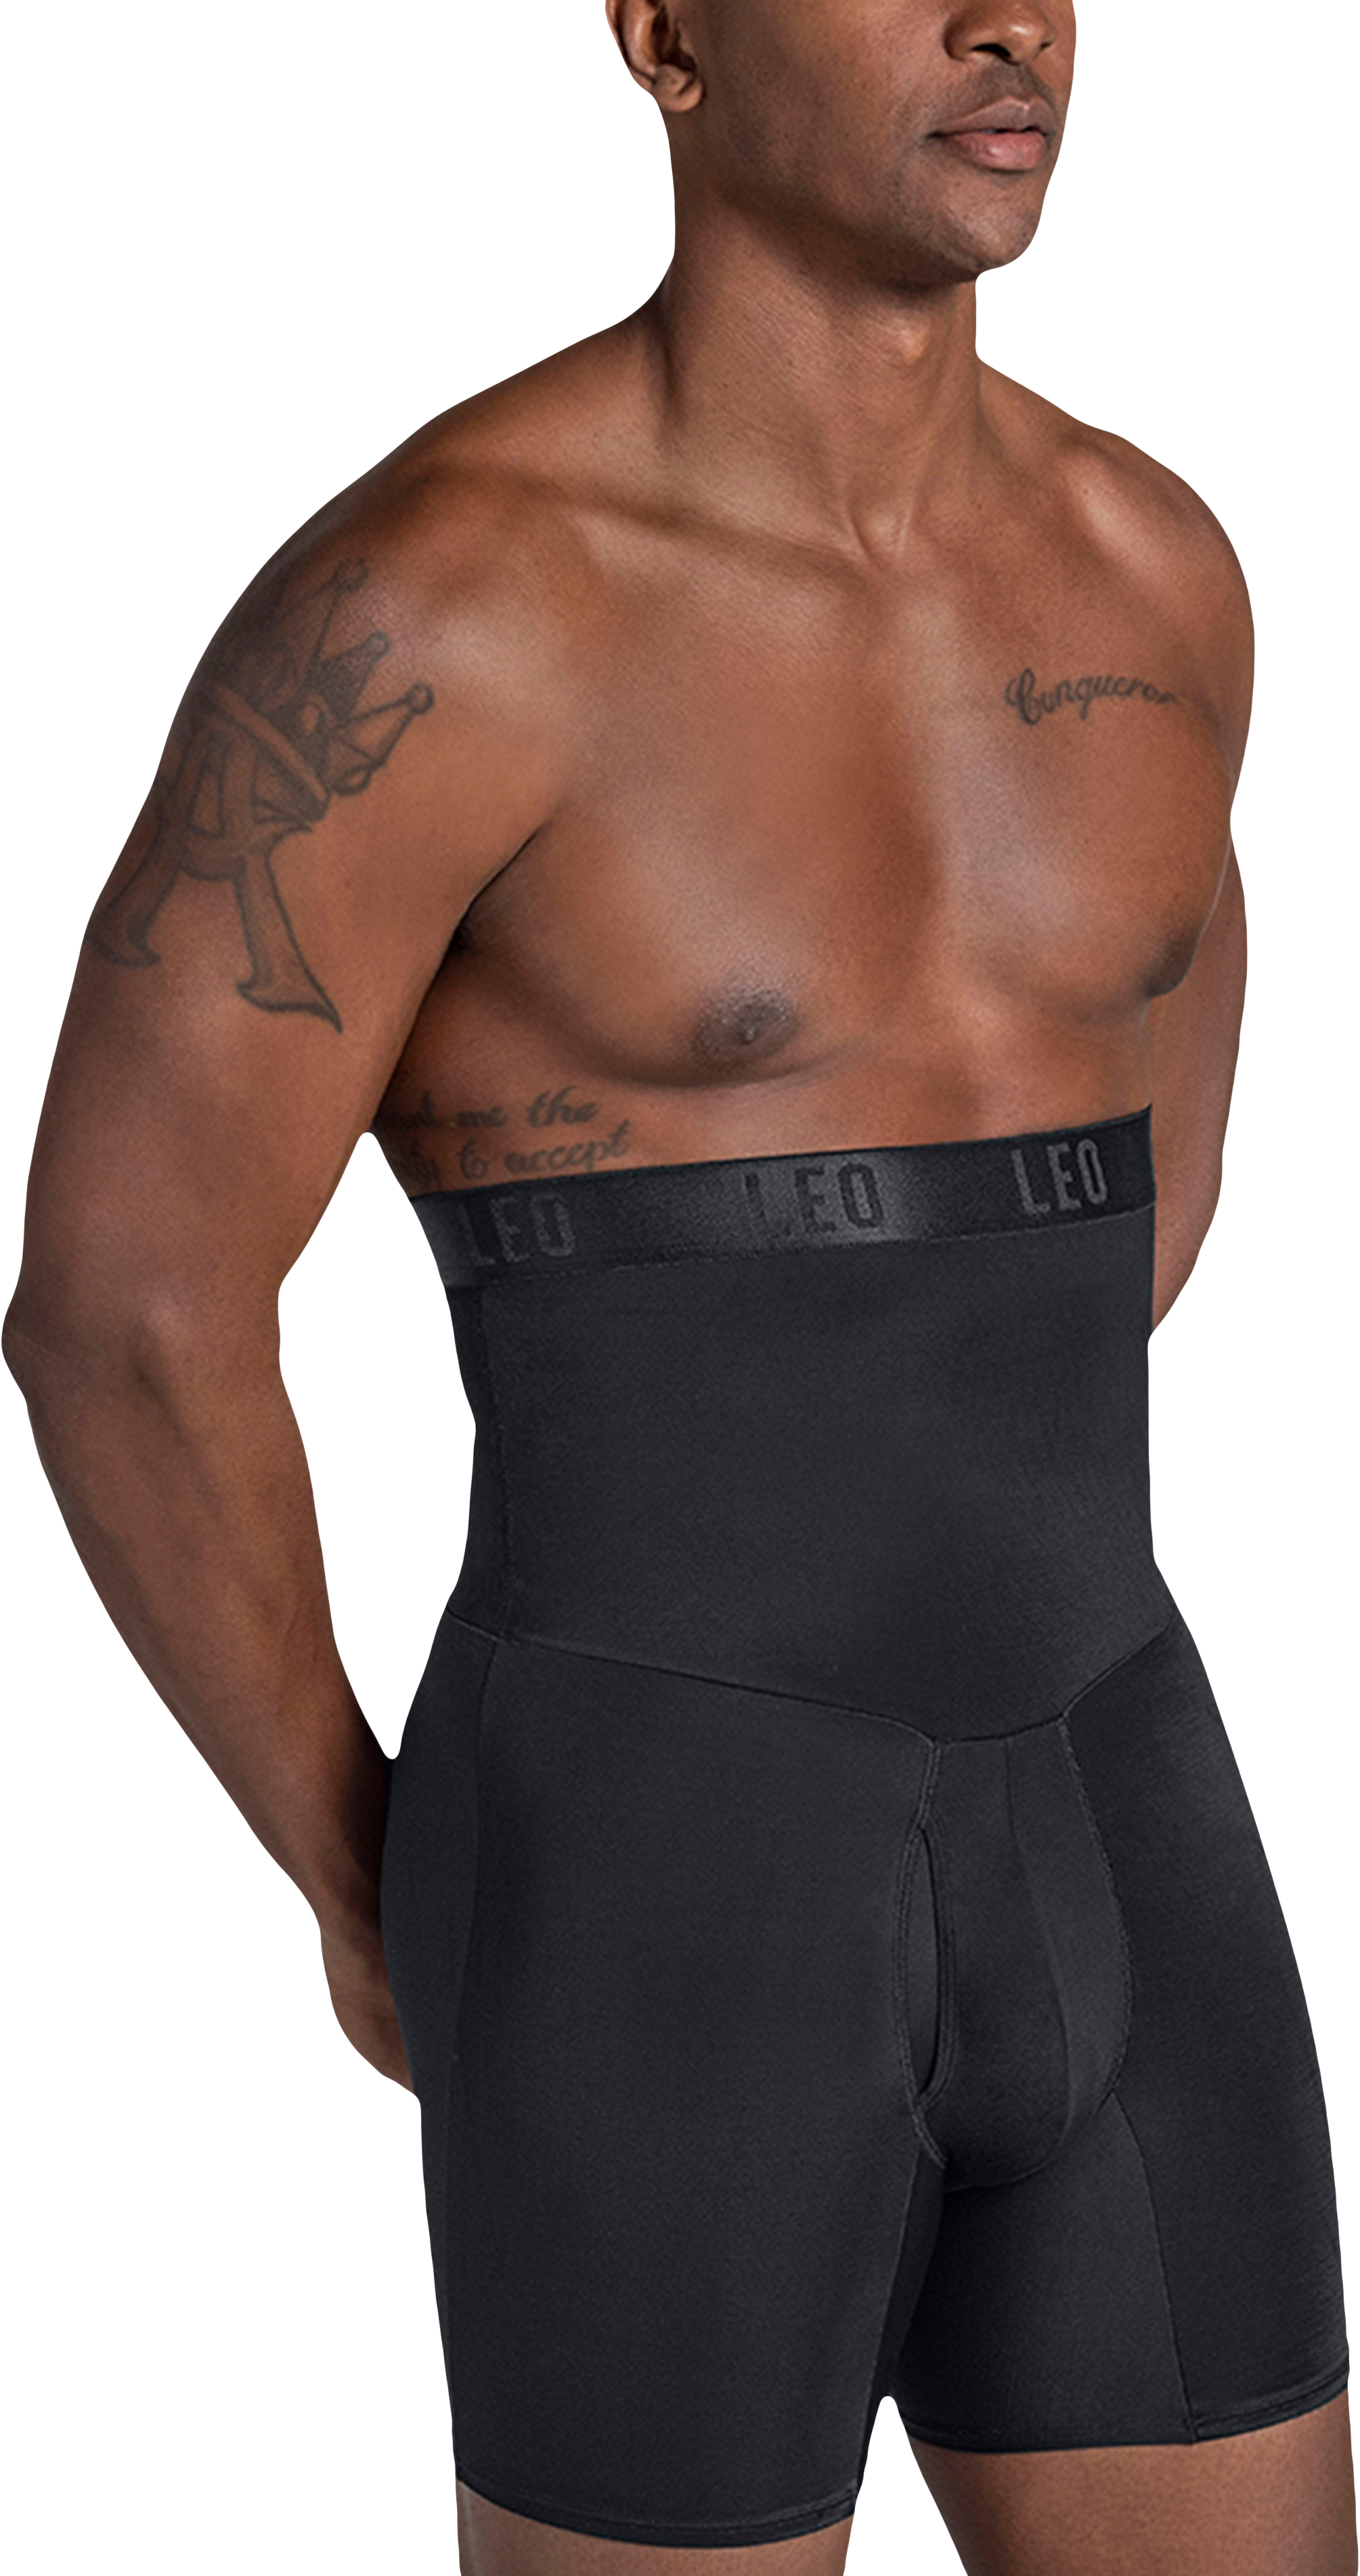 Leonisa Women's Firm Compression BoyShorts Body Shaper with Butt